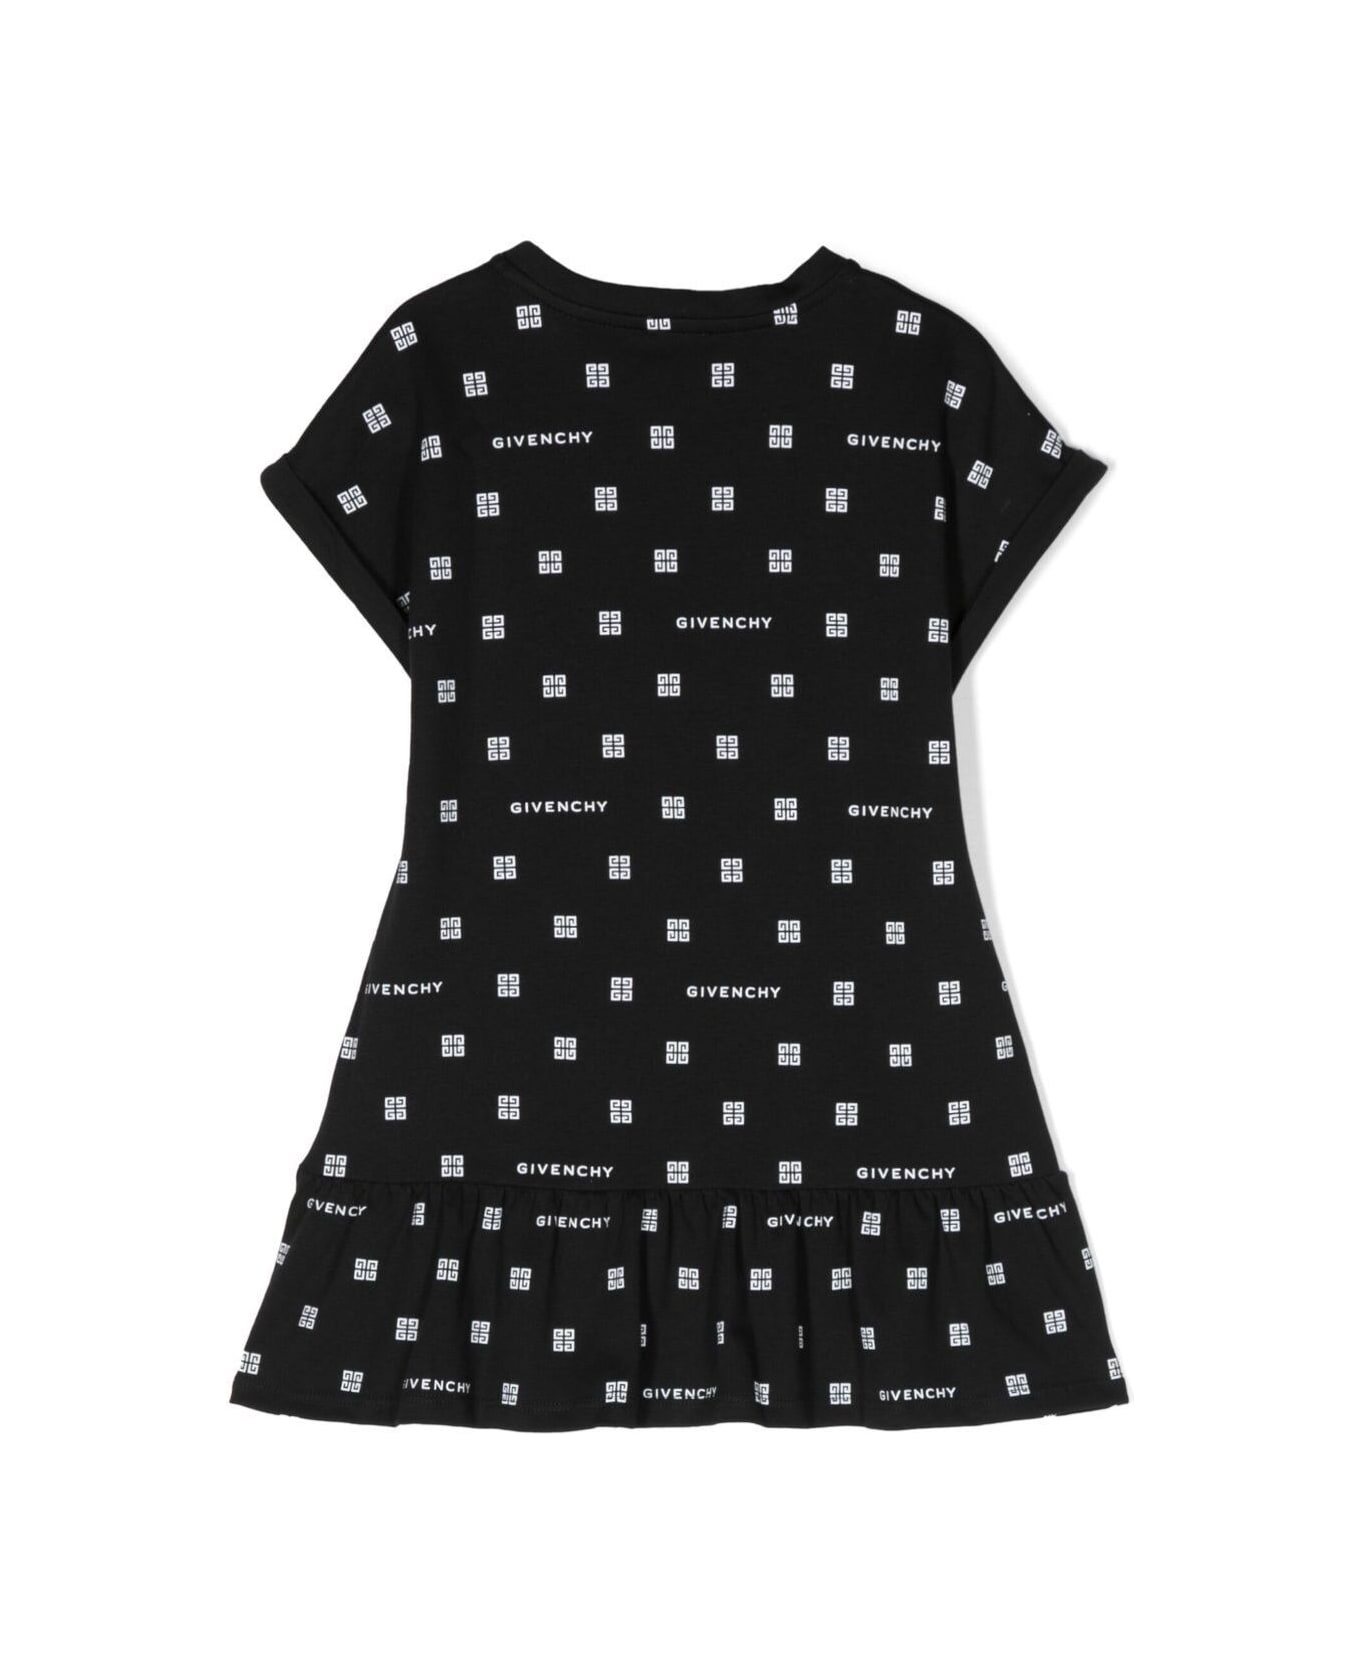 Givenchy Black Peplum Dress With 4g Logo Print All Over In Cotton Girl - Black